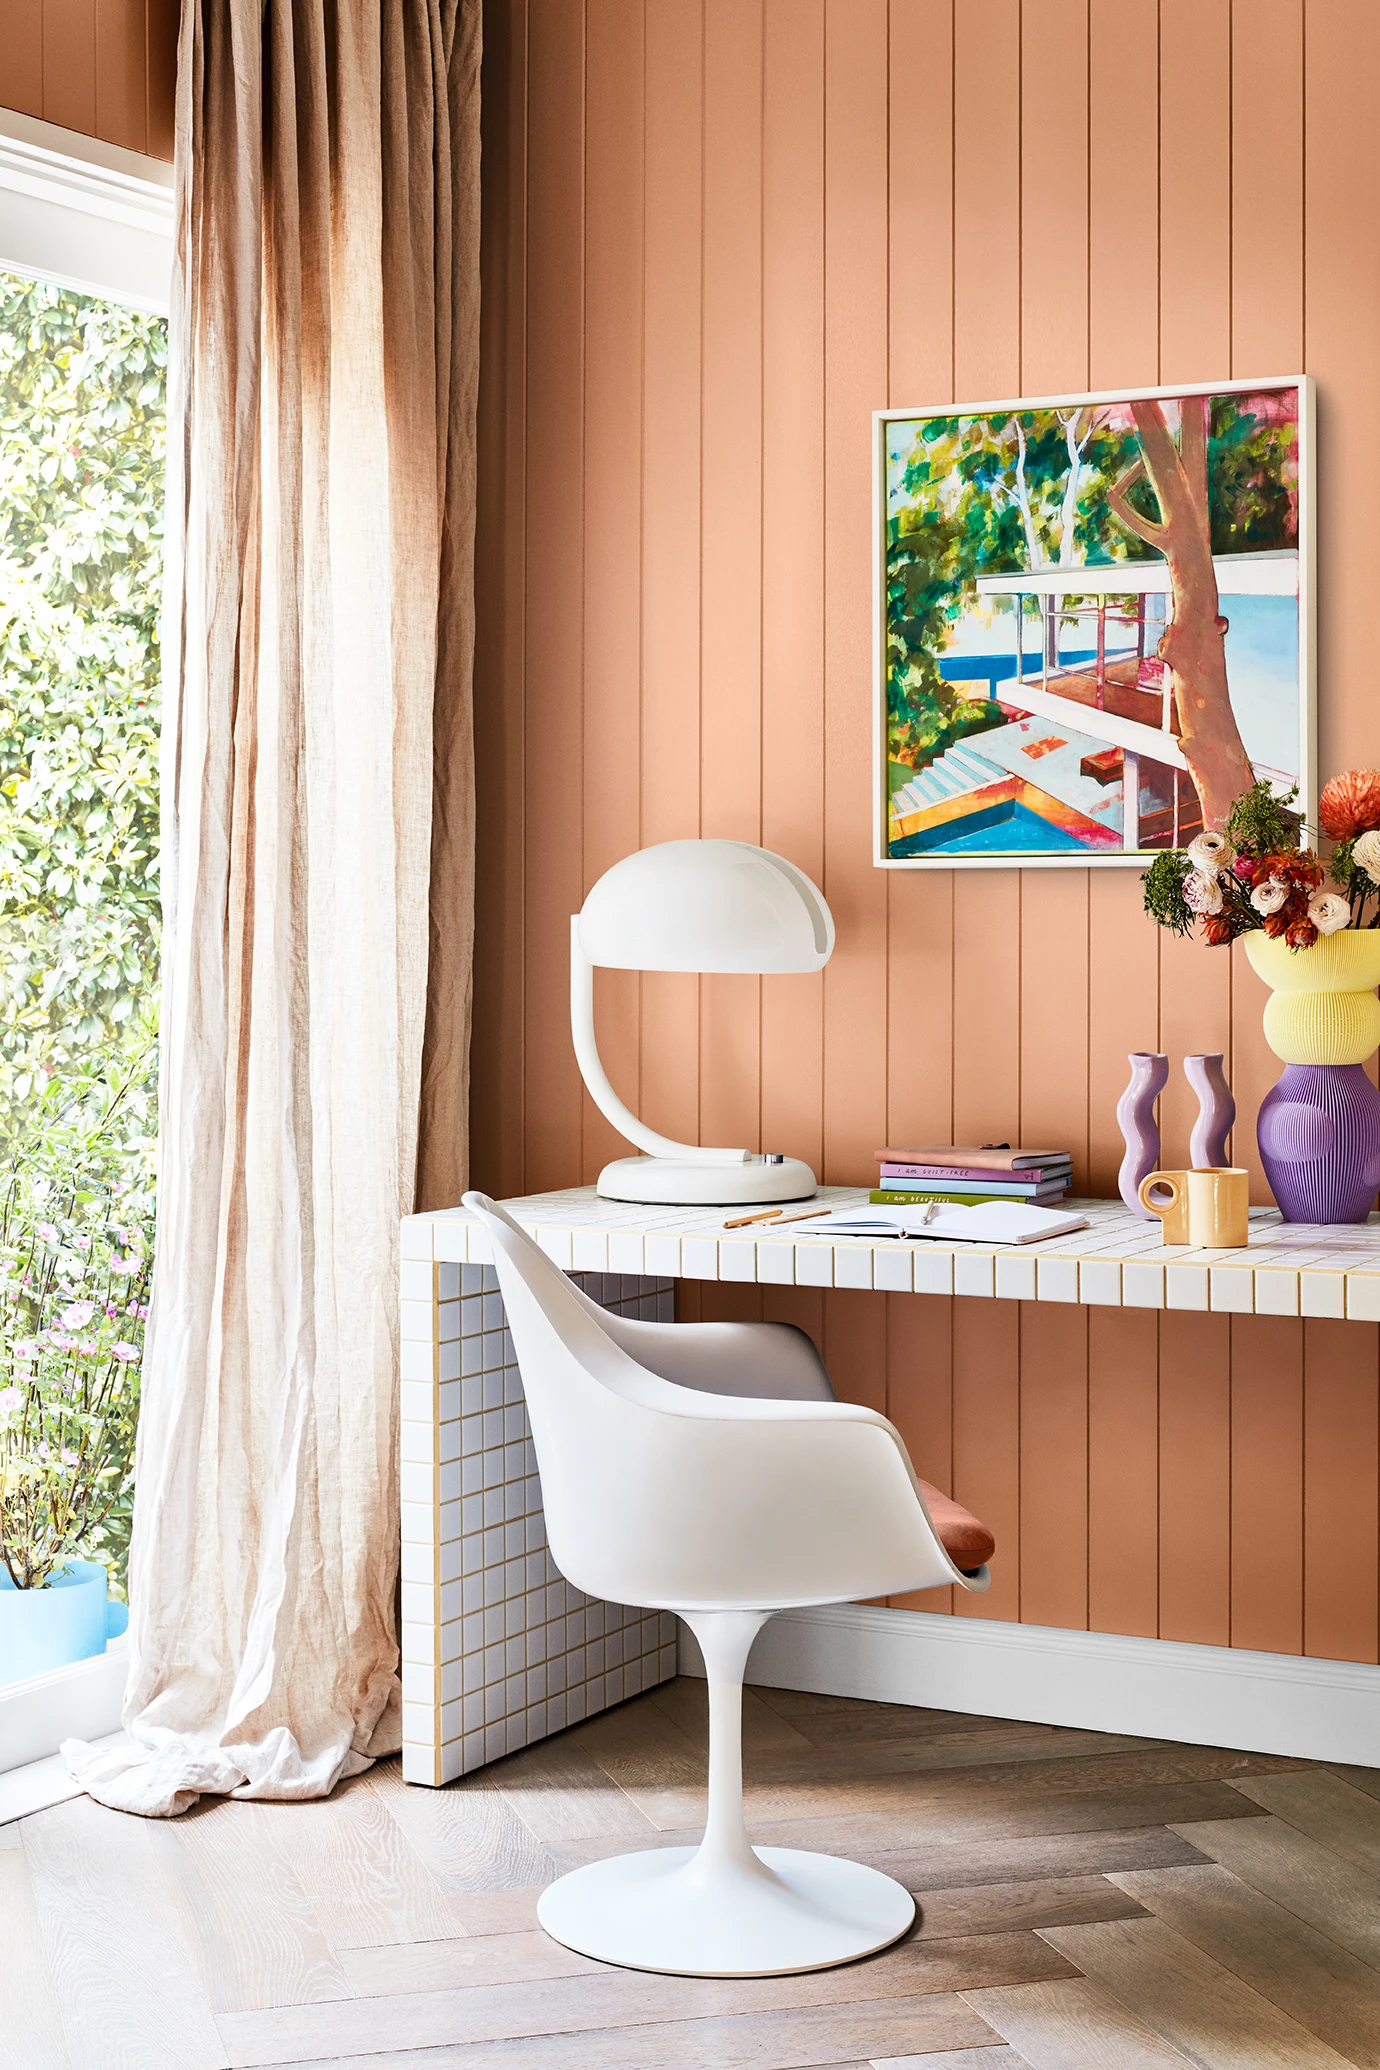 Study wall with VJ paneling painted orange, white desk and chair.